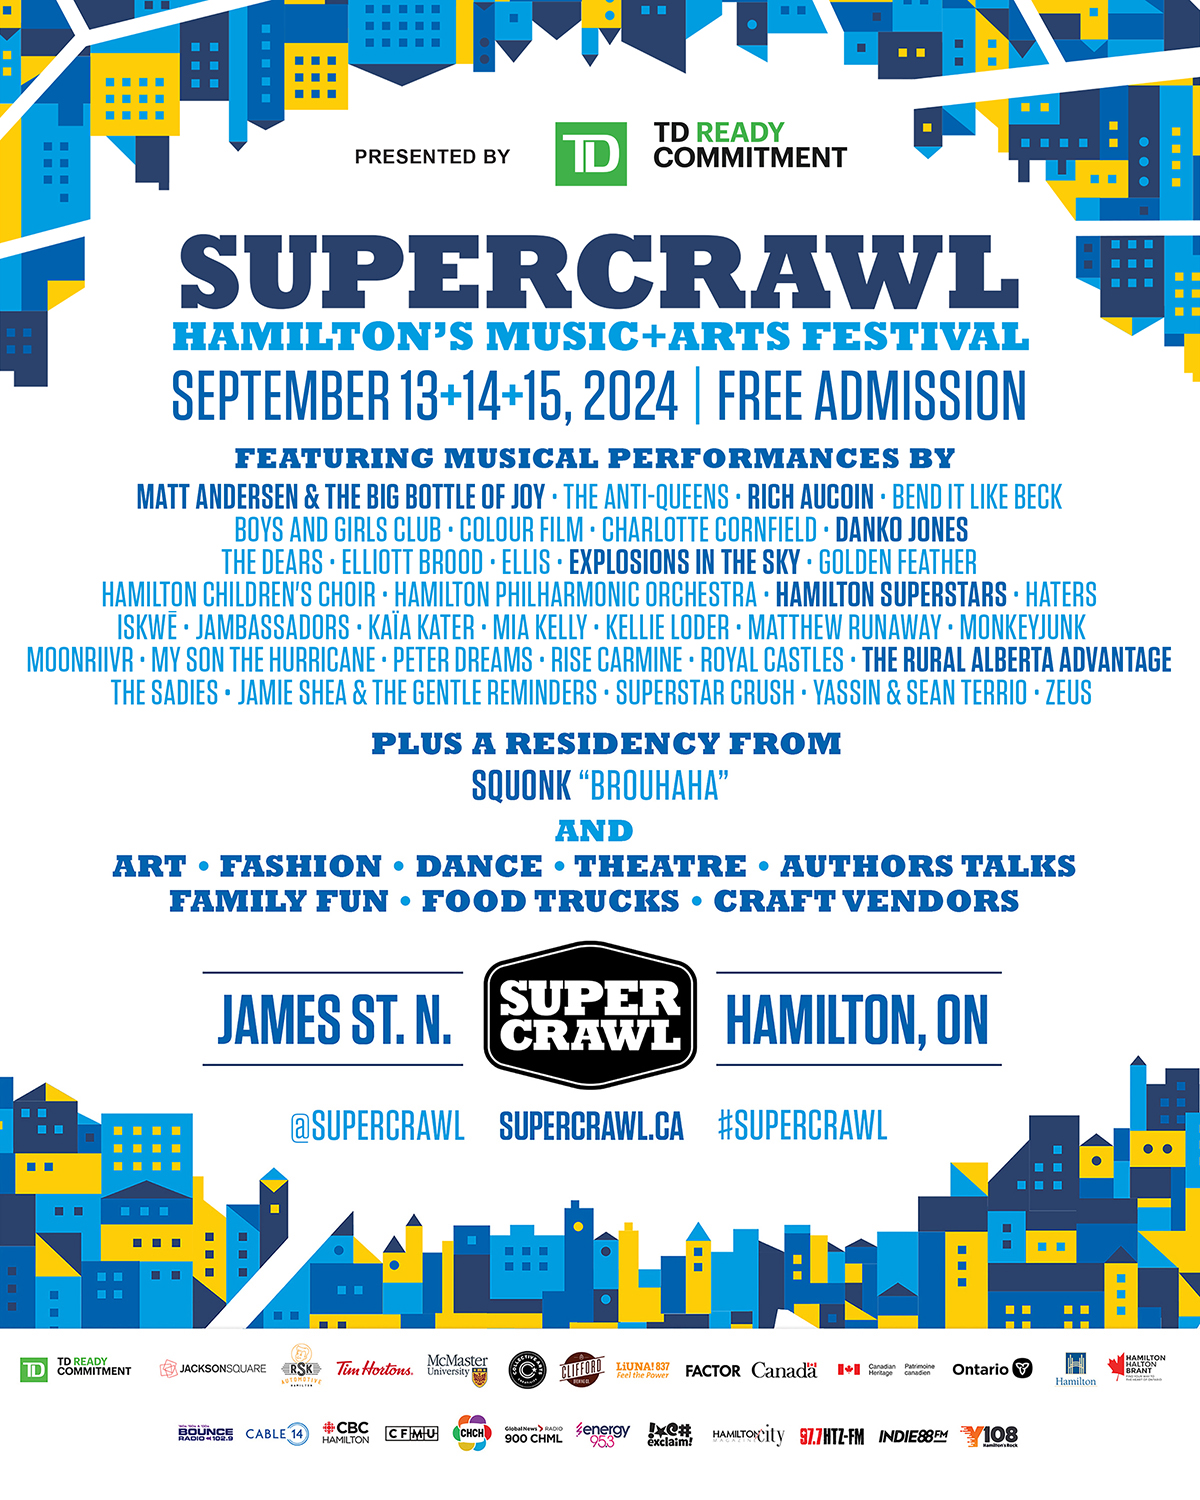 Festival poster framed with an abstract motif of city blocks in light, medium and dark blue with yellow highlights. Poster reads: TD Presents Supercrawl, Hamilton’s Music and Arts Festival, September 13, 14 and 15, 2024. Free admission. Featuring musical performances by Matt Andersen & The Big Bottle of Joy, The Anti-Queens, Rich Aucoin, Bend It Like Beck, Boys and Girls Club, Colour Film, Charlotte Cornfield, Danko Jones, The Dears, Elliott Brood, Ellis, Explosions in the Sky, Golden Feather, Hamilton Children's Choir, Hamilton Philharmonic Orchestra, Hamilton Superstars, Haters, iskwē, Jambassadors, Kaïa Kater, Mia Kelly, Kellie Loder, Matthew Runaway, MonkeyJunk, MOONRIIVR, My Son the Hurricane, Peter Dreams, Rise Carmine, Royal Castles, The Rural Alberta Advantage, The Sadies, Jamie Shea & the Gentle Reminders, Superstar Crush, Yassin + Sean Terrio, and Zeus. Plus A Residency From Squonk “Brouhaha”. Below this text is the Supercrawl logo, flanked by the words James St. N. and Hamilton, ON. Festival website supercrawl.ca is listed below the logo, and is flanked by the social media handle @supercrawl and event hashtag #supercrawl. Festival sponsors arrayed across the bottom of the poster include TD Bank Group, Jackson Square, RSK Automotive and Collision, Tim Hortons, McMaster University, Collective Arts Brewing, Clifford Brewing Co., LIUNA Local 837, FACTOR, Building Communities, Canadian Heritage, City of Hamilton, and Hamilton Halton Brant Regional Tourism Association. Media partner logos arrayed on the line below include 102.9 Bounce FM, Cable 14, CBC Hamilton, CFMU, CHCH, AM900 CHML, Energy 95.3, Exclaim!, Hamilton City Magazine, 97.7 HTZ-FM, Indie 88, and Y108.